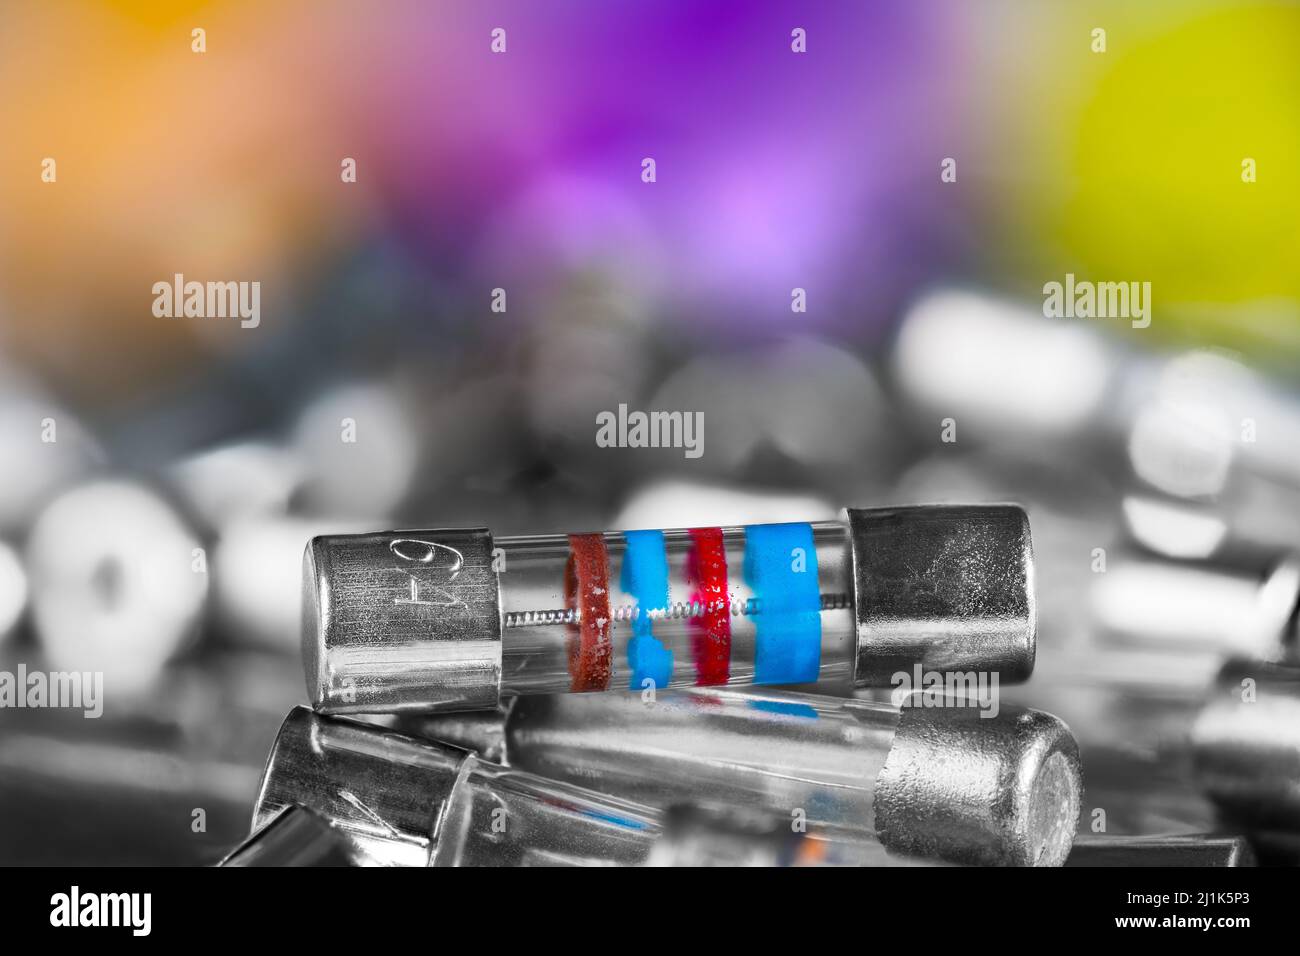 Closeup of small electrical fuses pile on a blurry background with colored and white bokeh. Safety device for overcurrent protection with fusible wire. Stock Photo